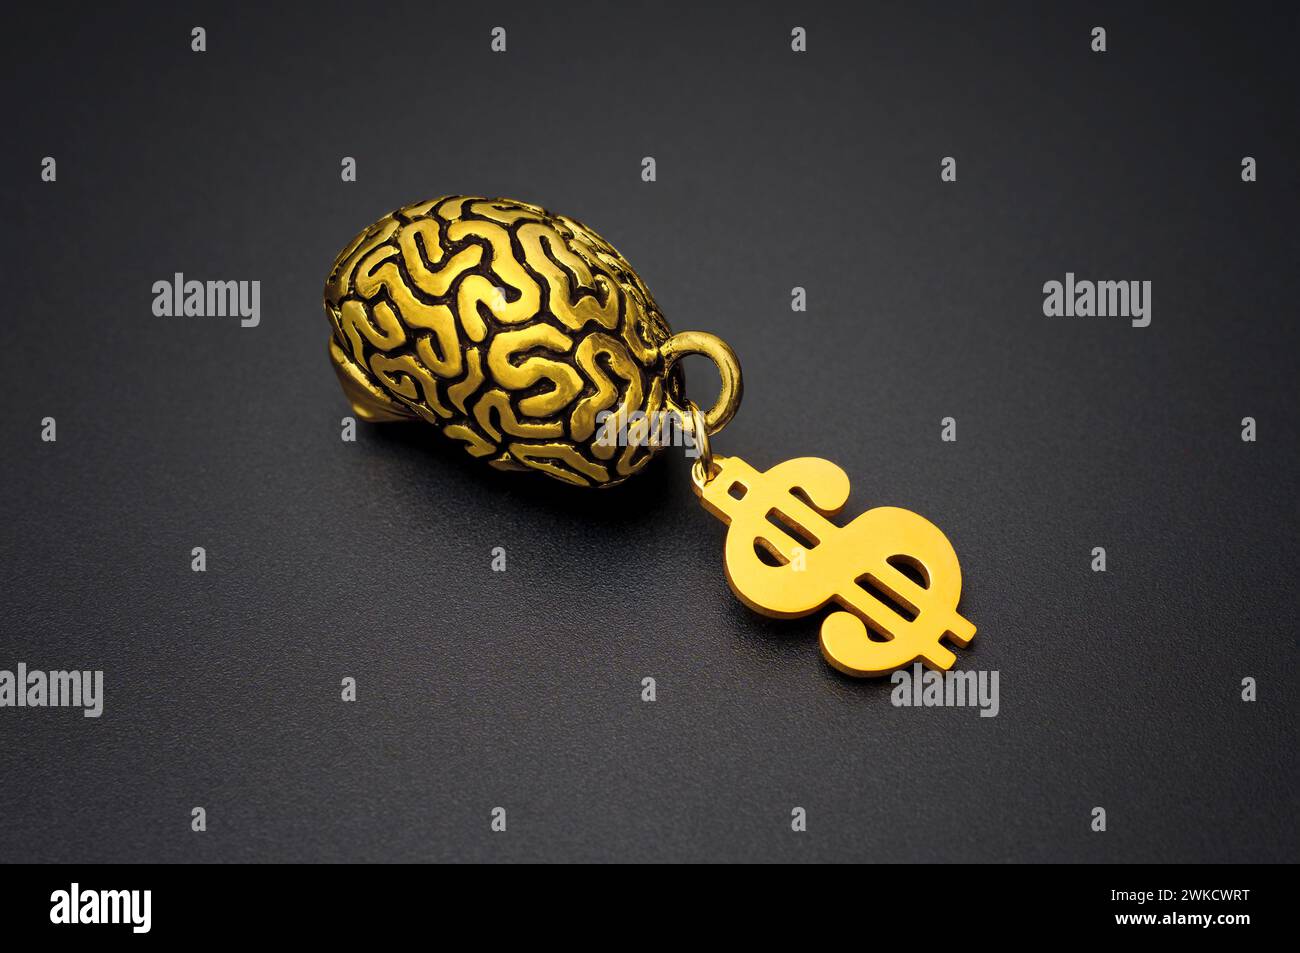 Gold-plated brain adorned with a shimmering dollar sign, set against a sleek black background. Wisdom and wealth related concept. Stock Photo